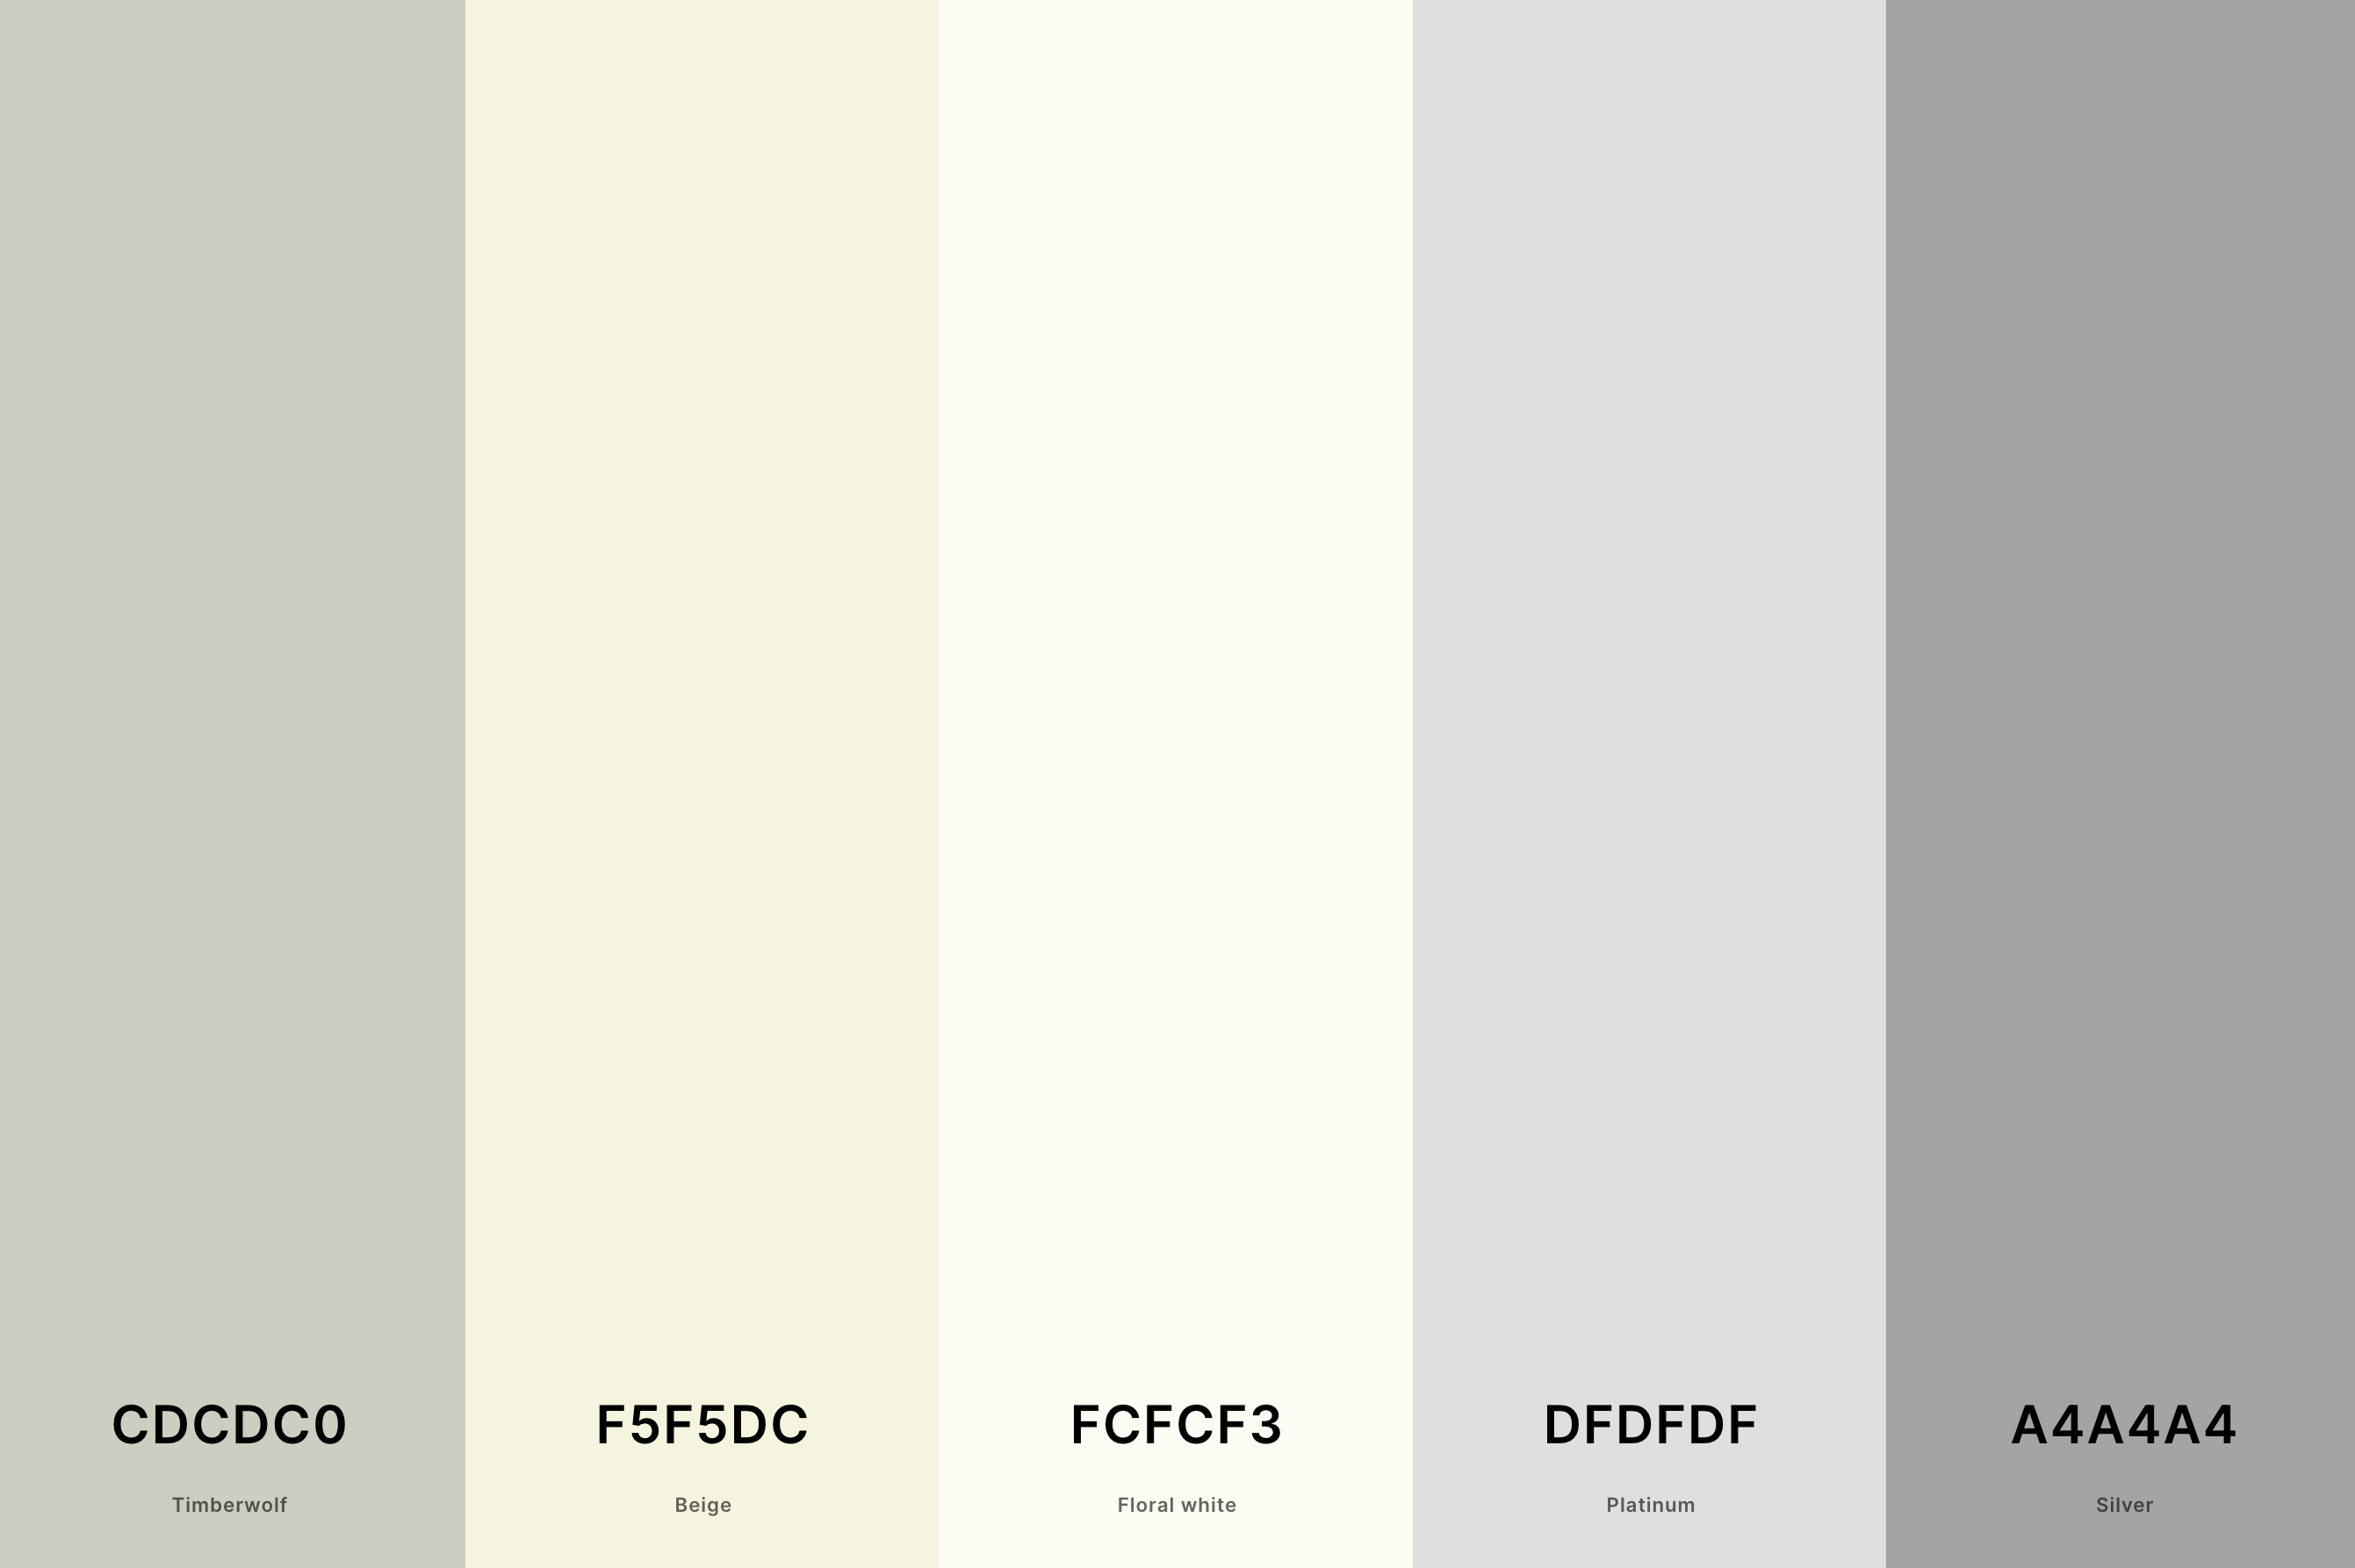 23. Beige, Gray And White Color Palette Color Palette with Timberwolf (Hex #CDCDC0) + Beige (Hex #F5F5DC) + Floral White (Hex #FCFCF3) + Platinum (Hex #DFDFDF) + Silver (Hex #A4A4A4) Color Palette with Hex Codes